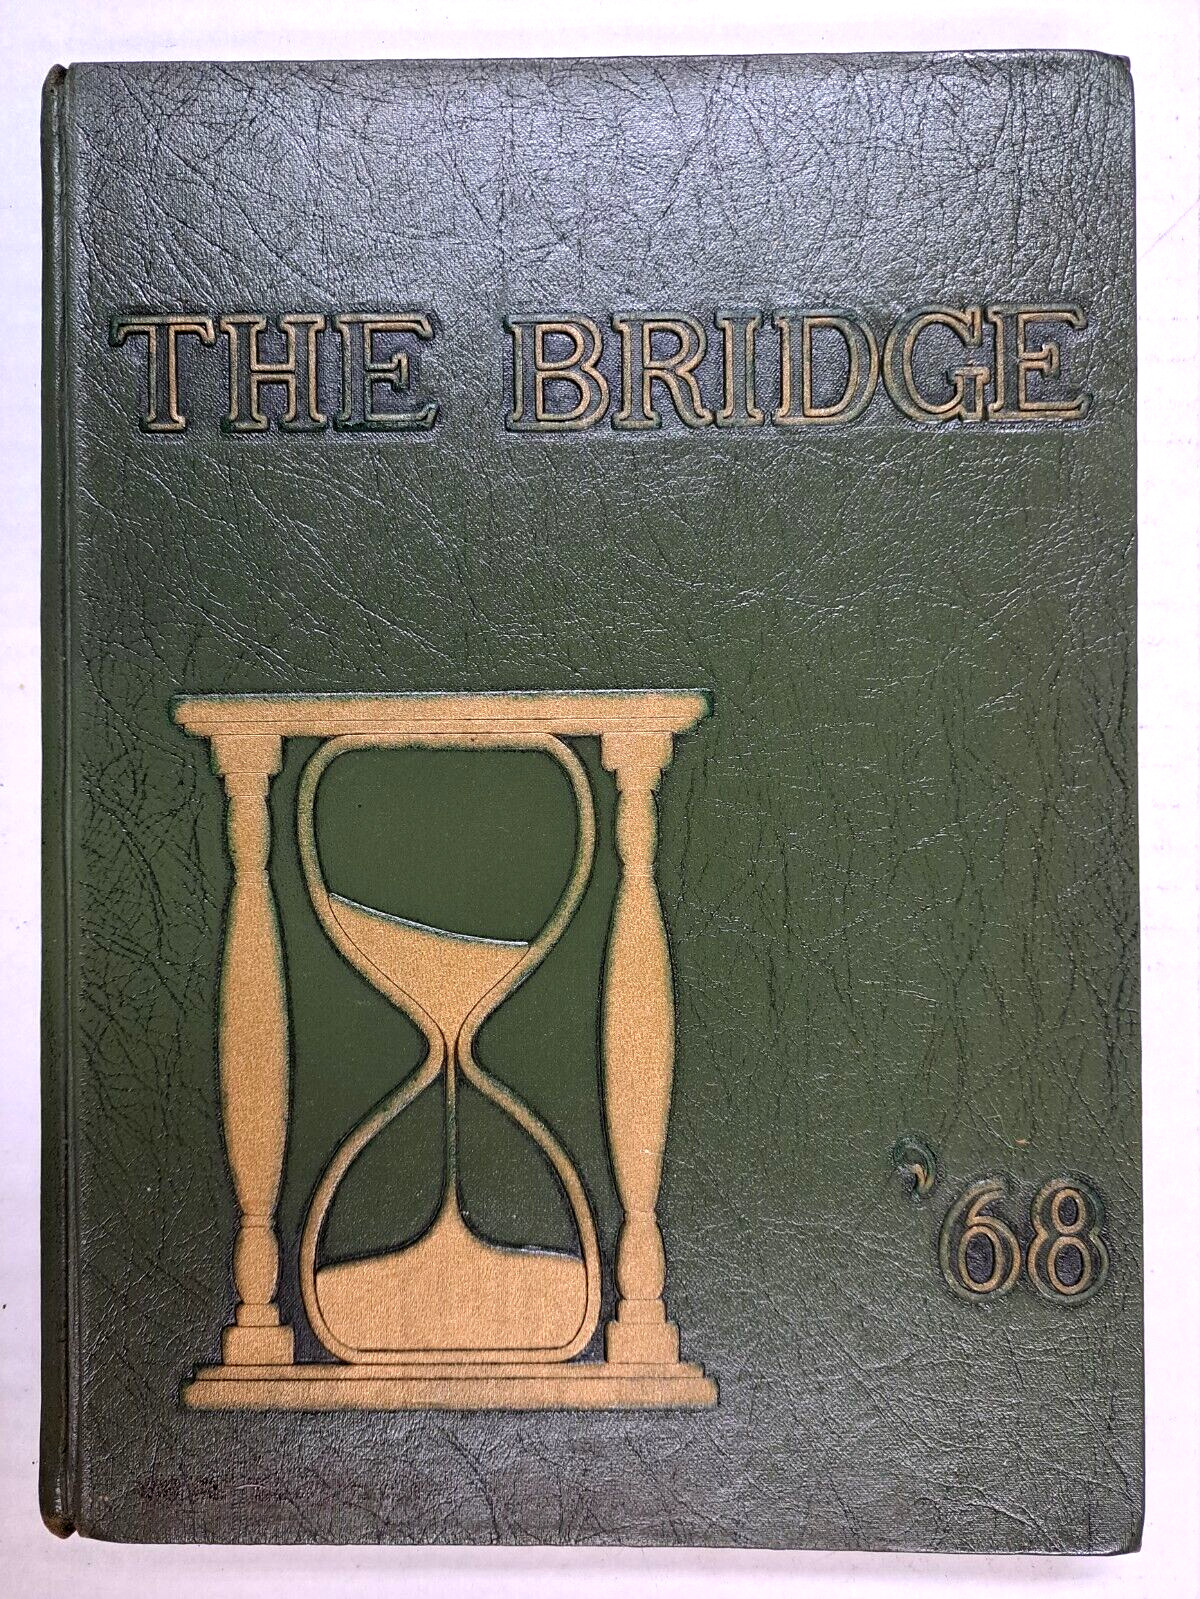 Vintage 1968 THE BRIDGE Fayetteville Central High School Annual Tennessee